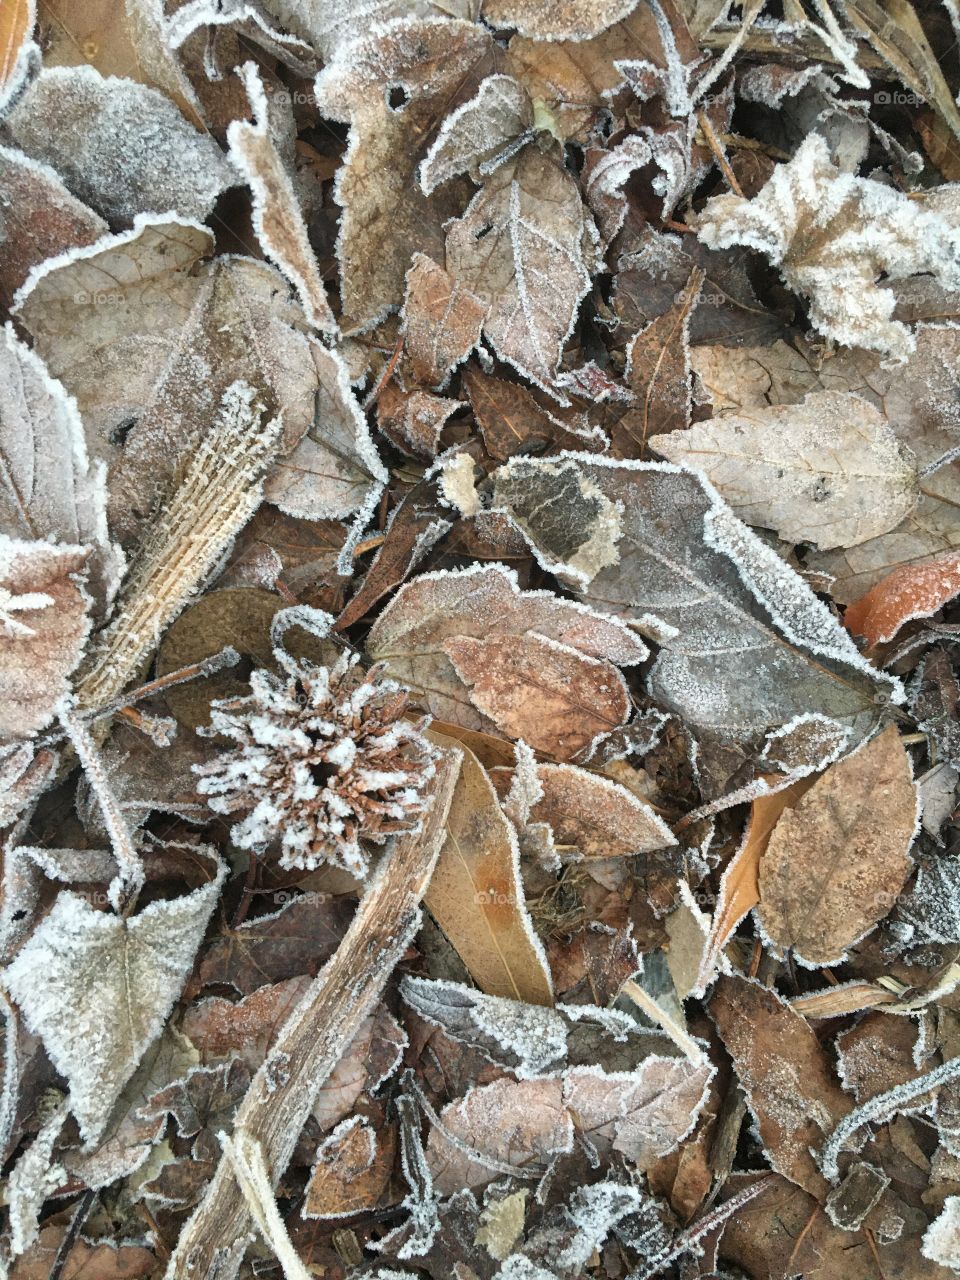 Early morning frost on fallen leaves and pine cones